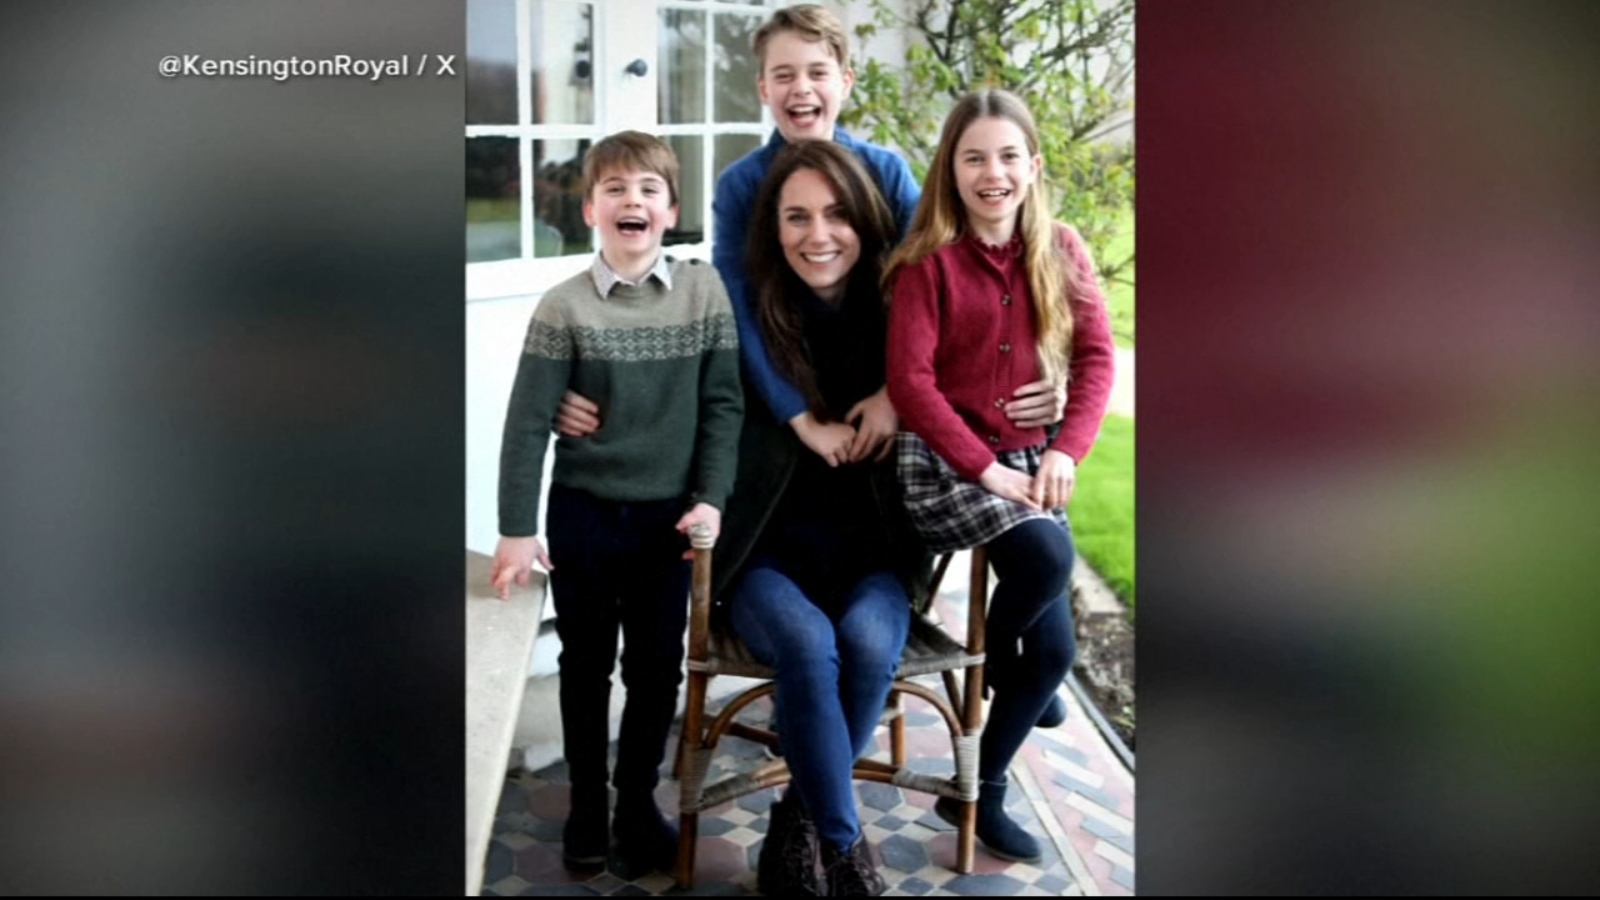 Kate Middleton apology: Princess Kate of Wales responds to photoshopped family picture after photo redacted by news agencies [Video]